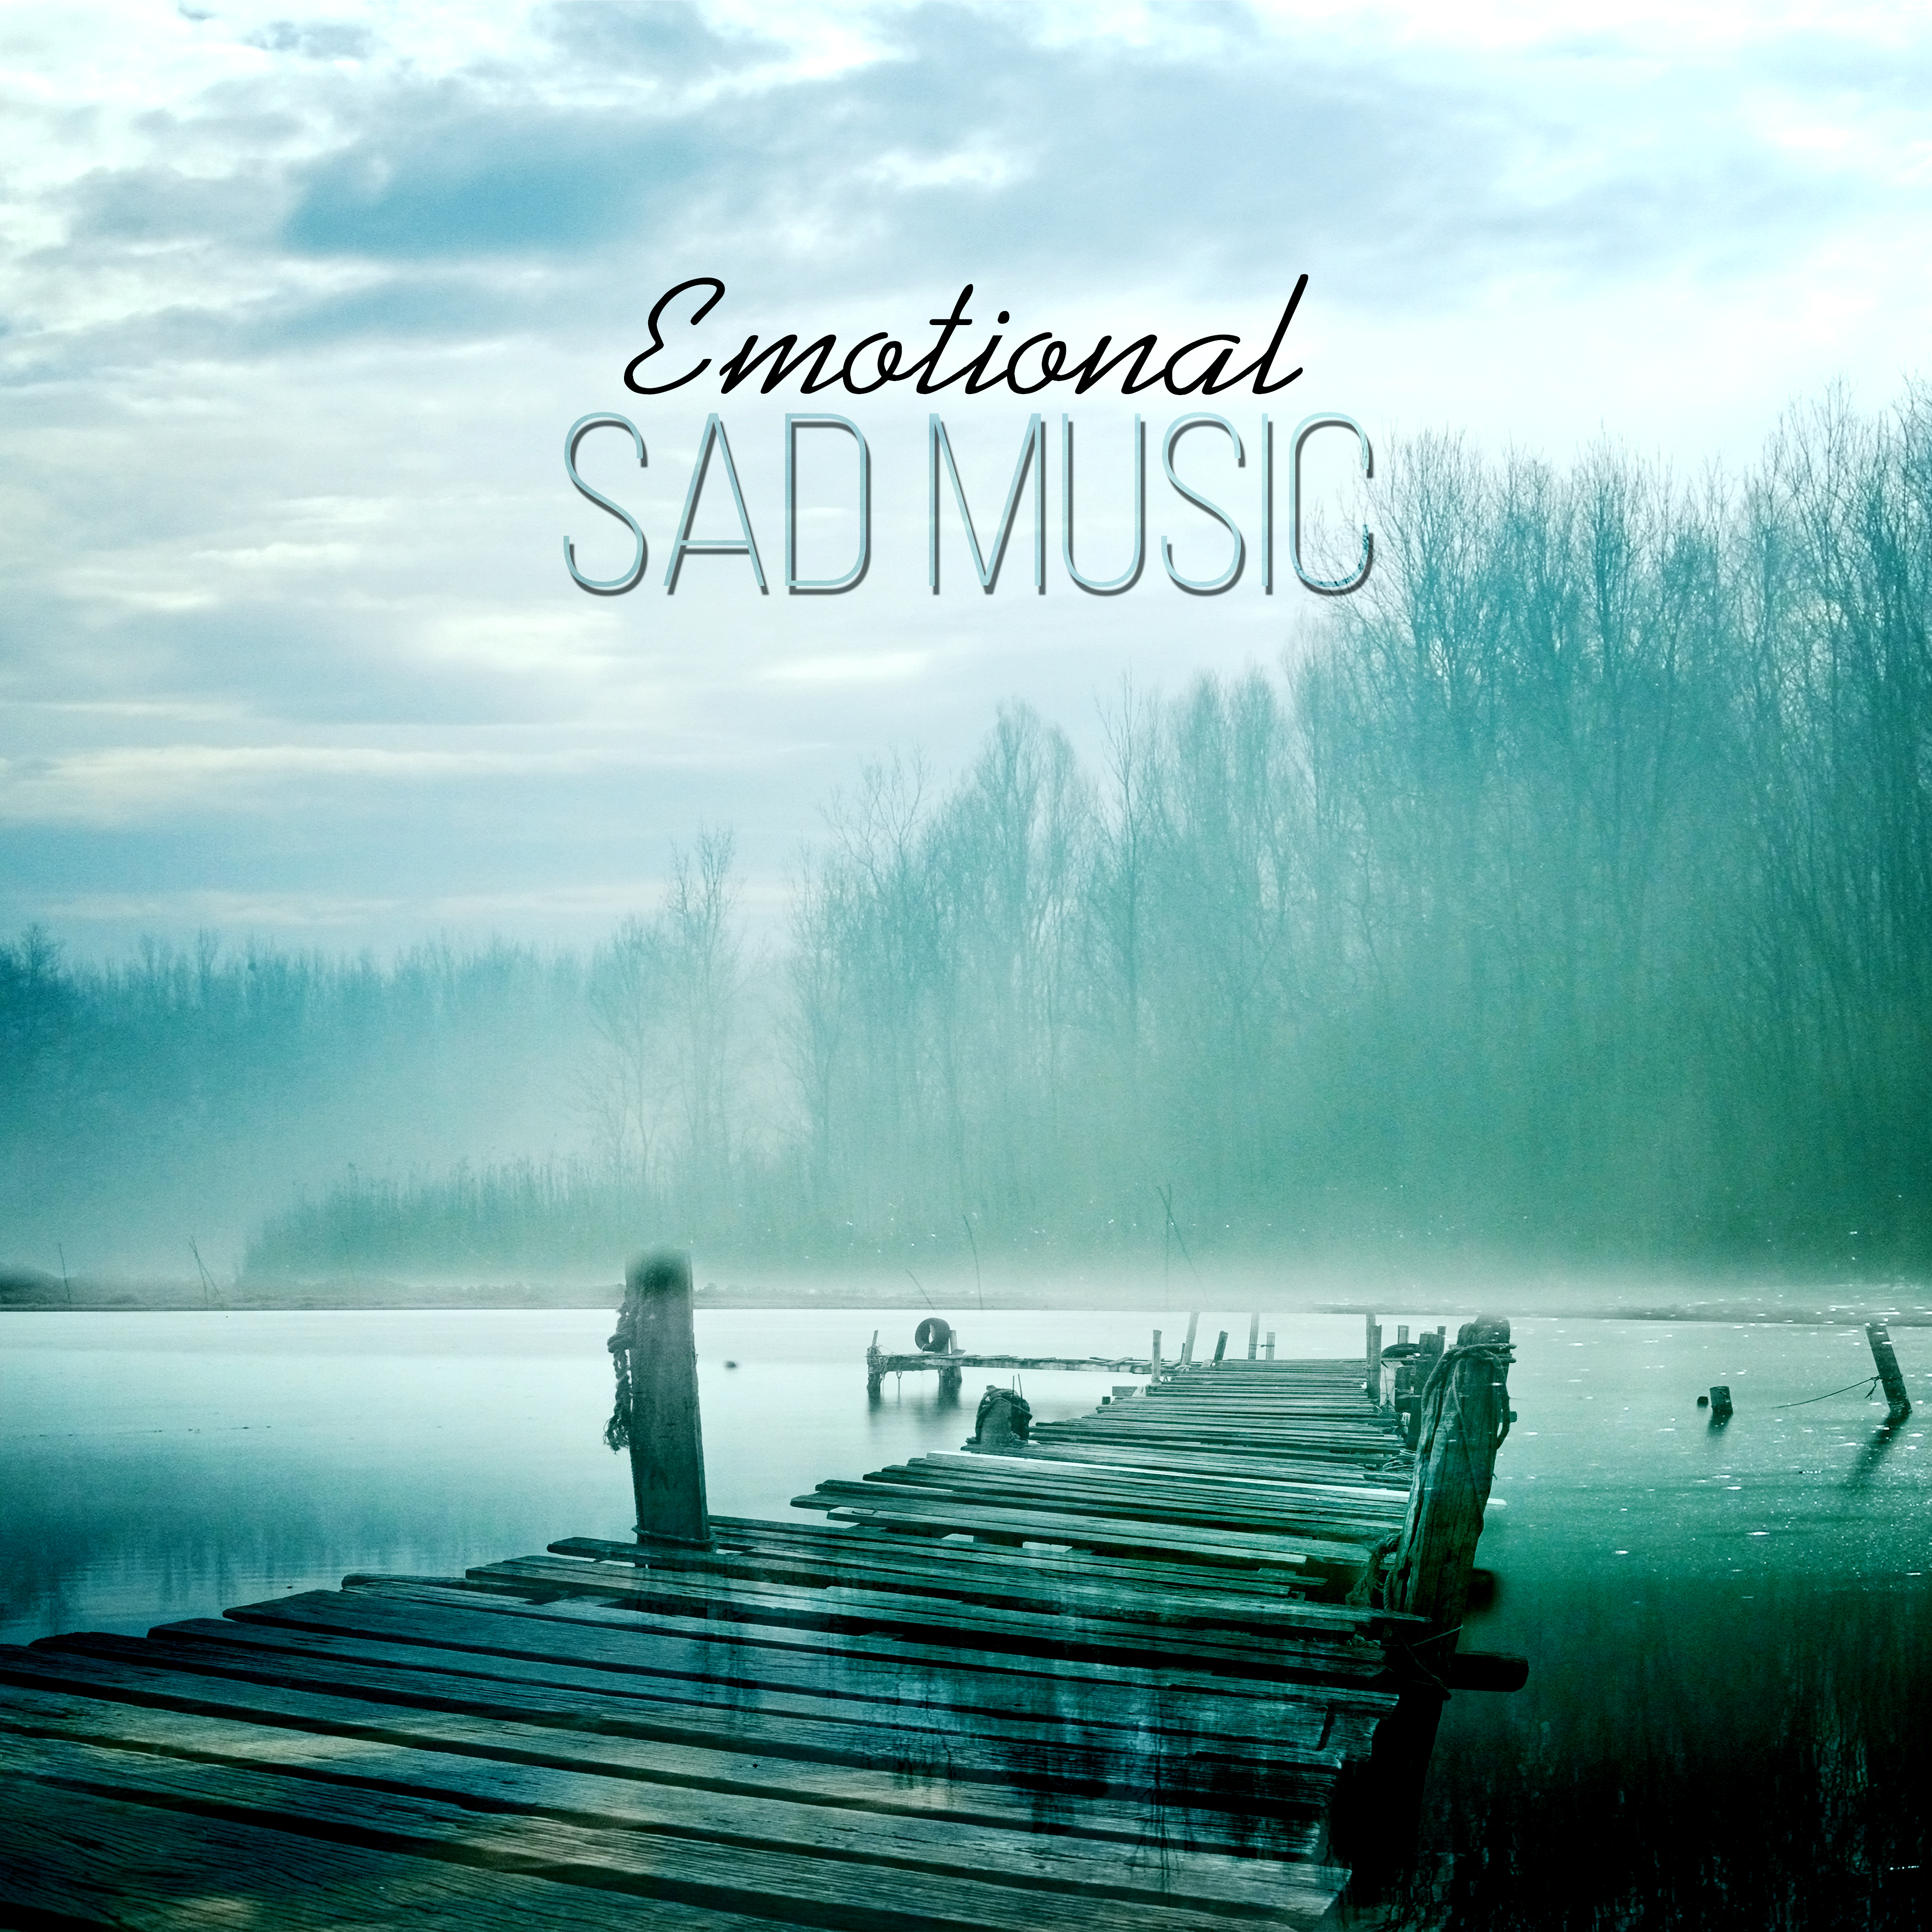 Emotional Sad Music  Instrumental Sad Songs, Romantic Background Music, Sentimental Music to Cry, Reflective Music for Broken Heart, Sad Piano Love Songs